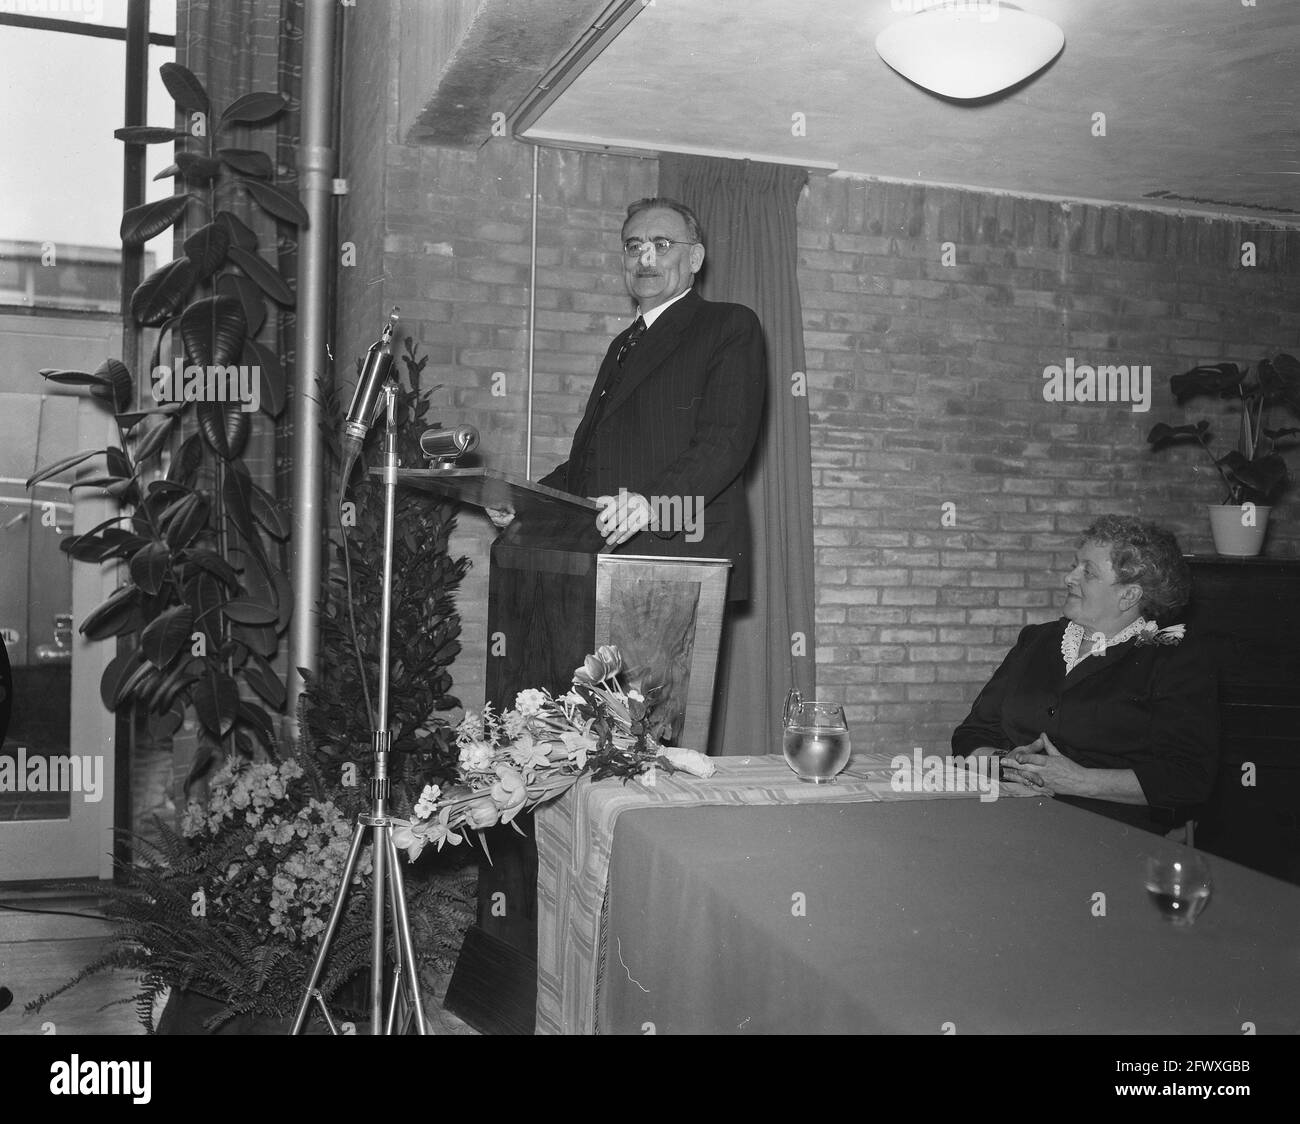 Opening of the Willem Dreeshuis in Amsterdam. Speech by Dr. W. Drees, February 5, 1957, retirement homes, openings, speeches, The Netherlands, 20th ce Stock Photo